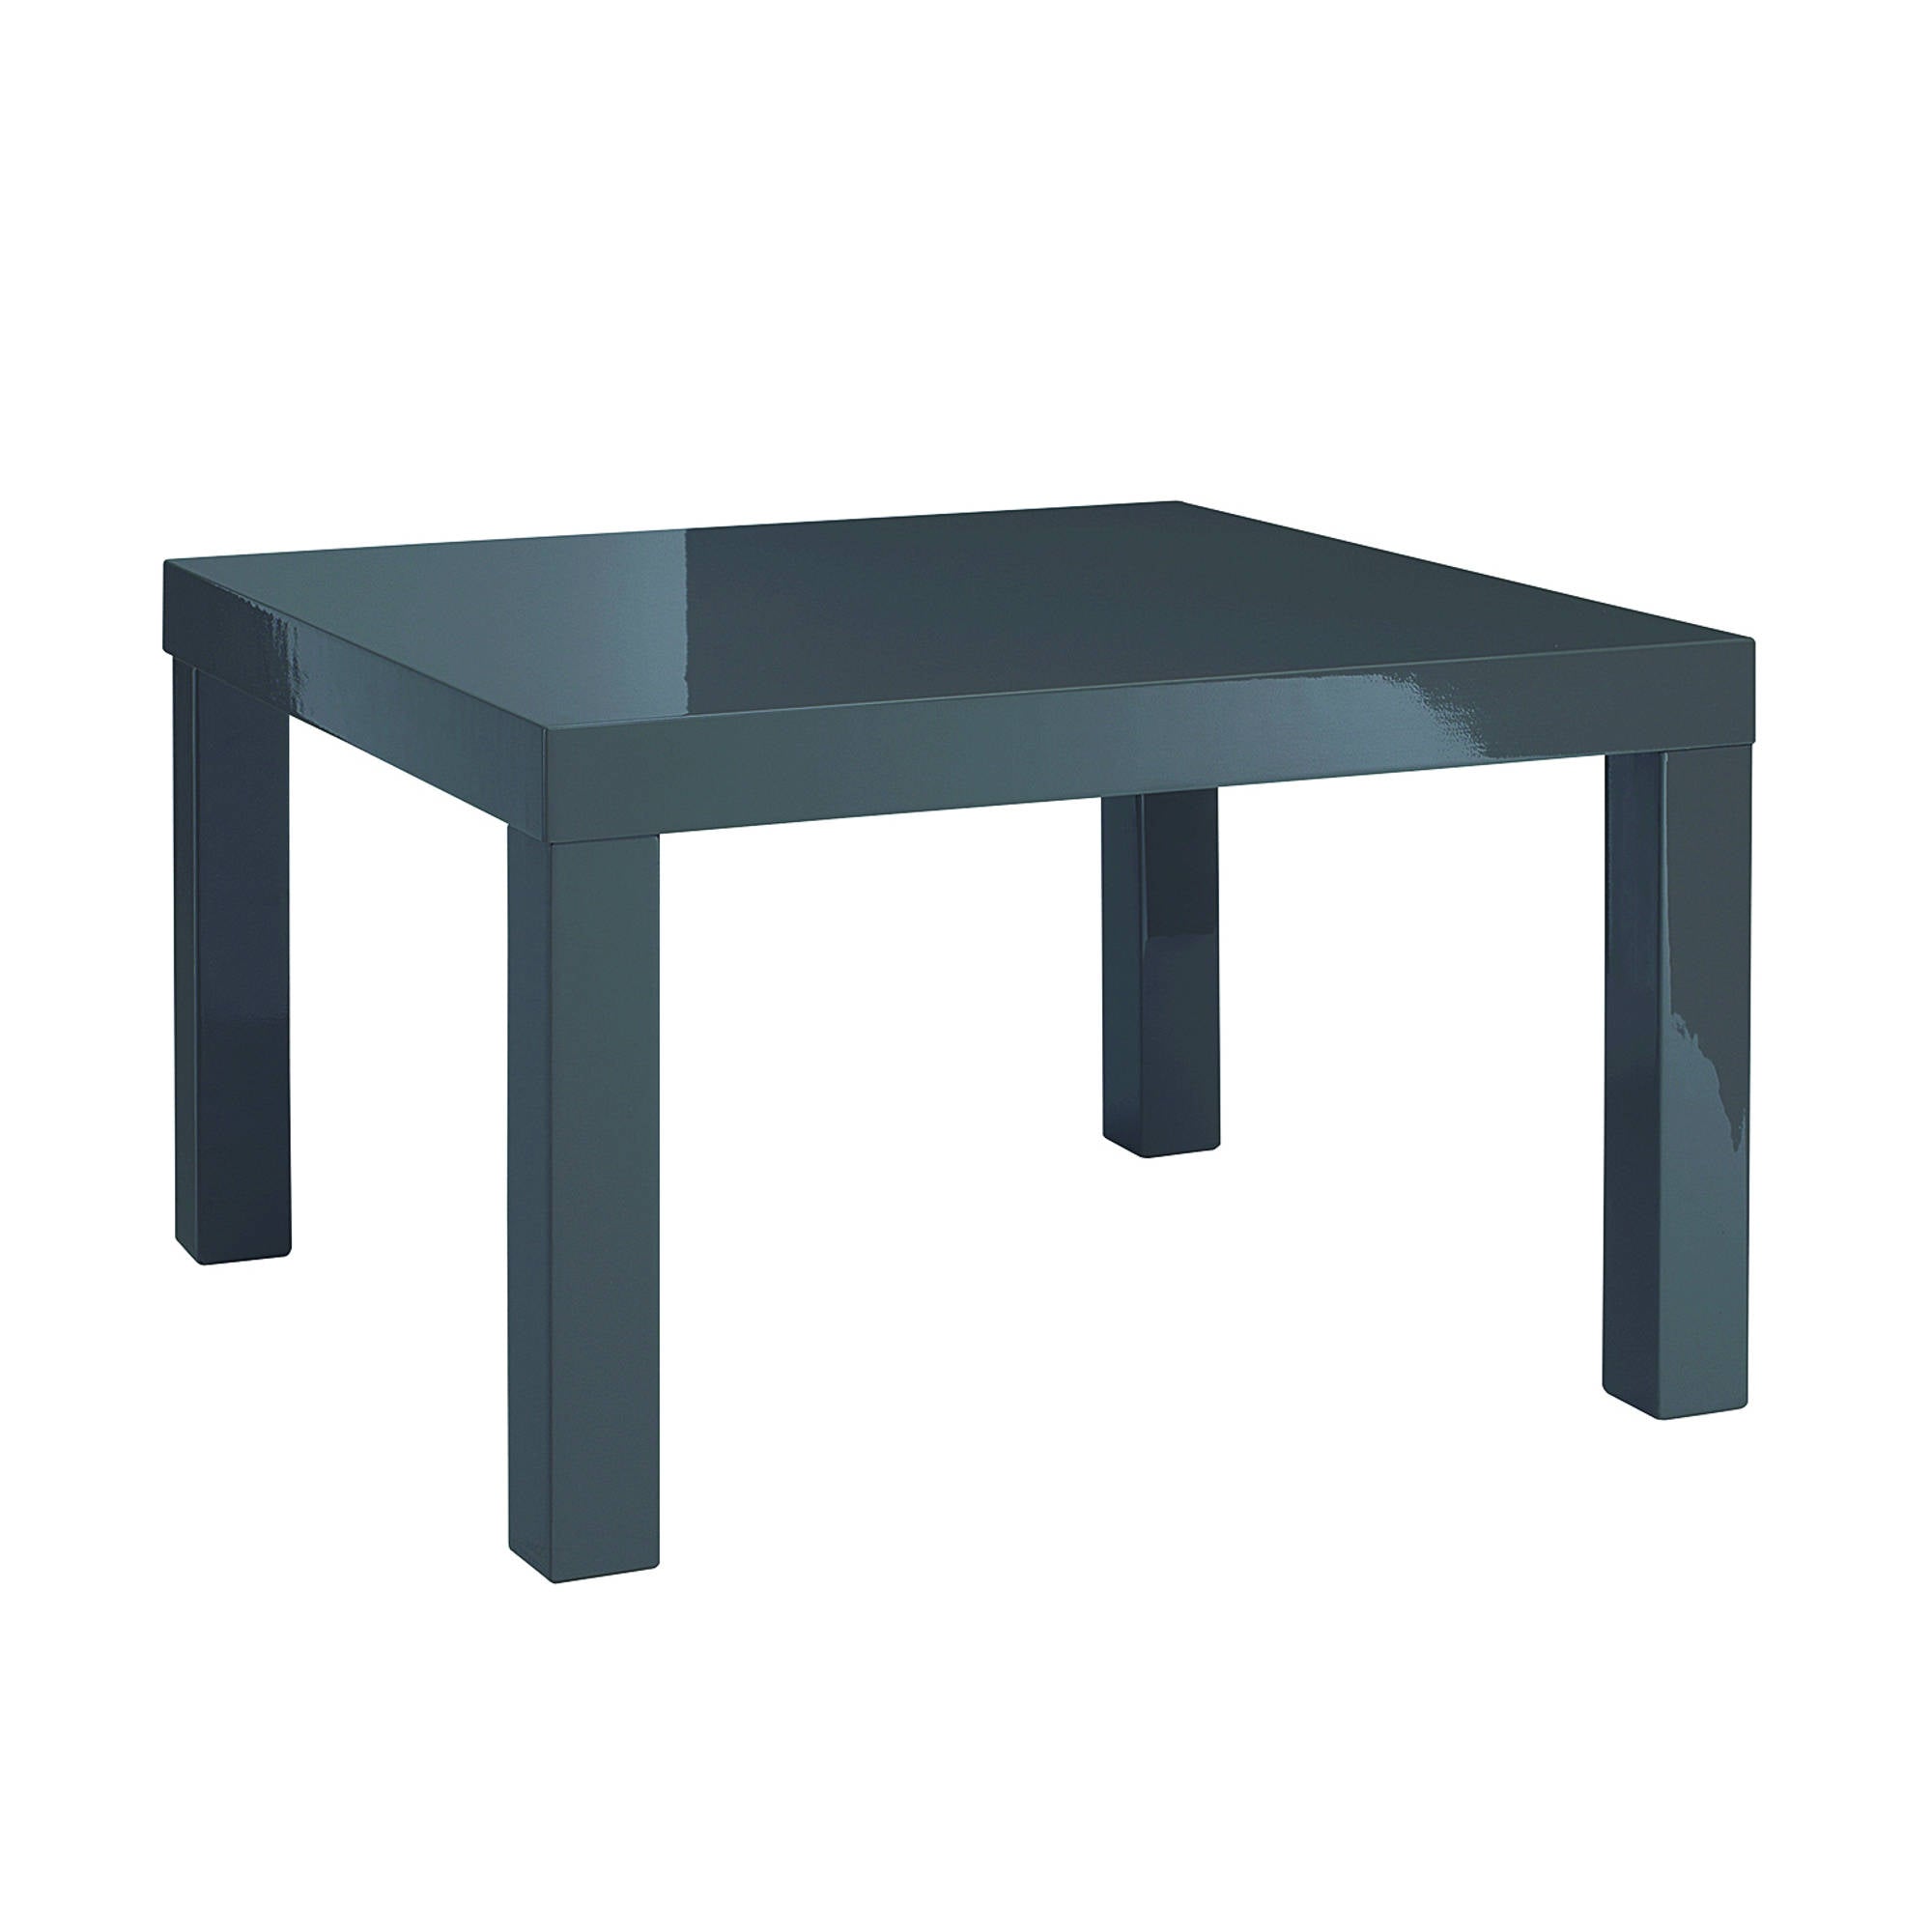 Sterling Lamp Table in Charcoal - Ezzo